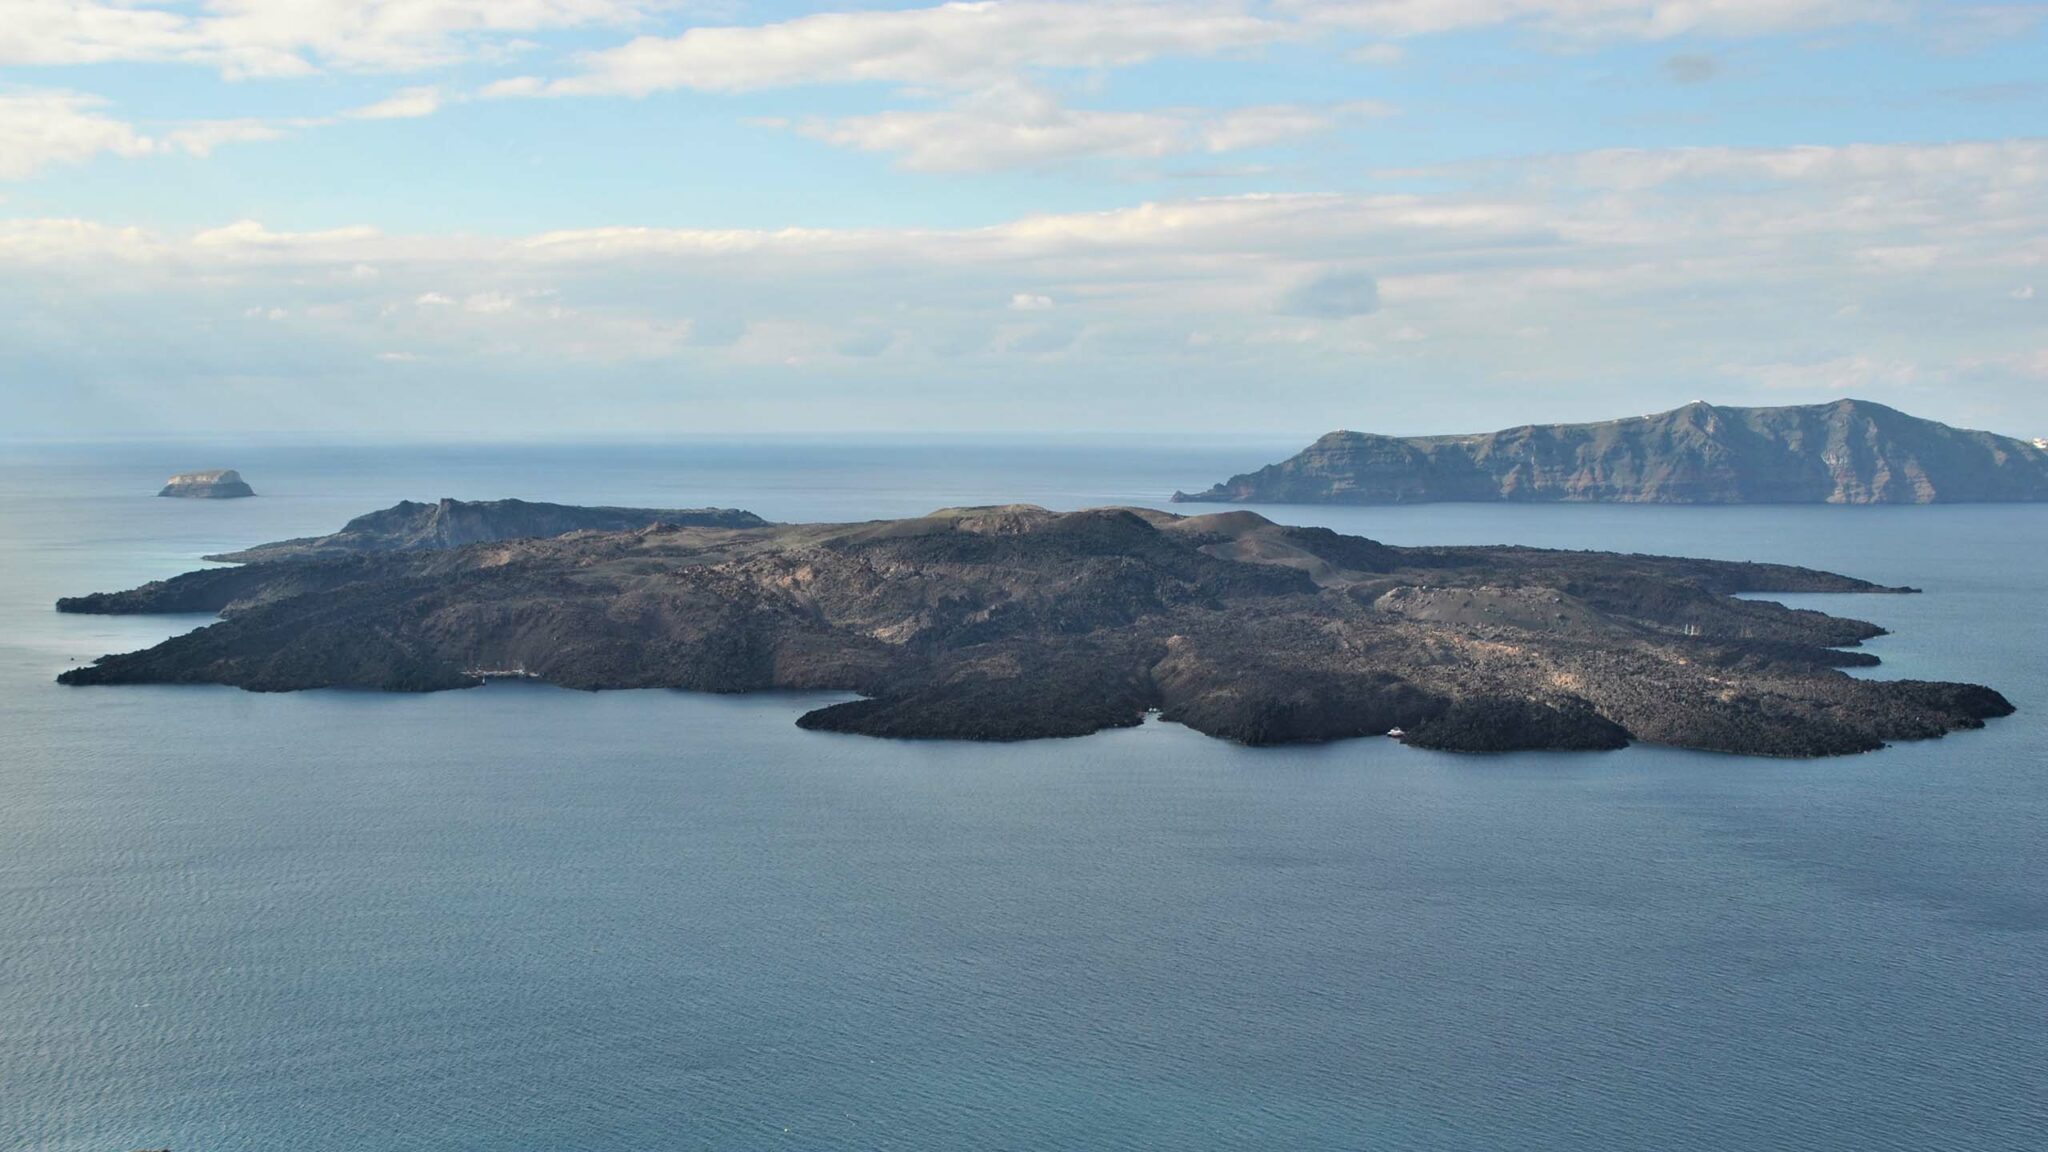 Panorama of the volcano: View of Palea and Nea Kameni and Aspronisi and Therasia in the background